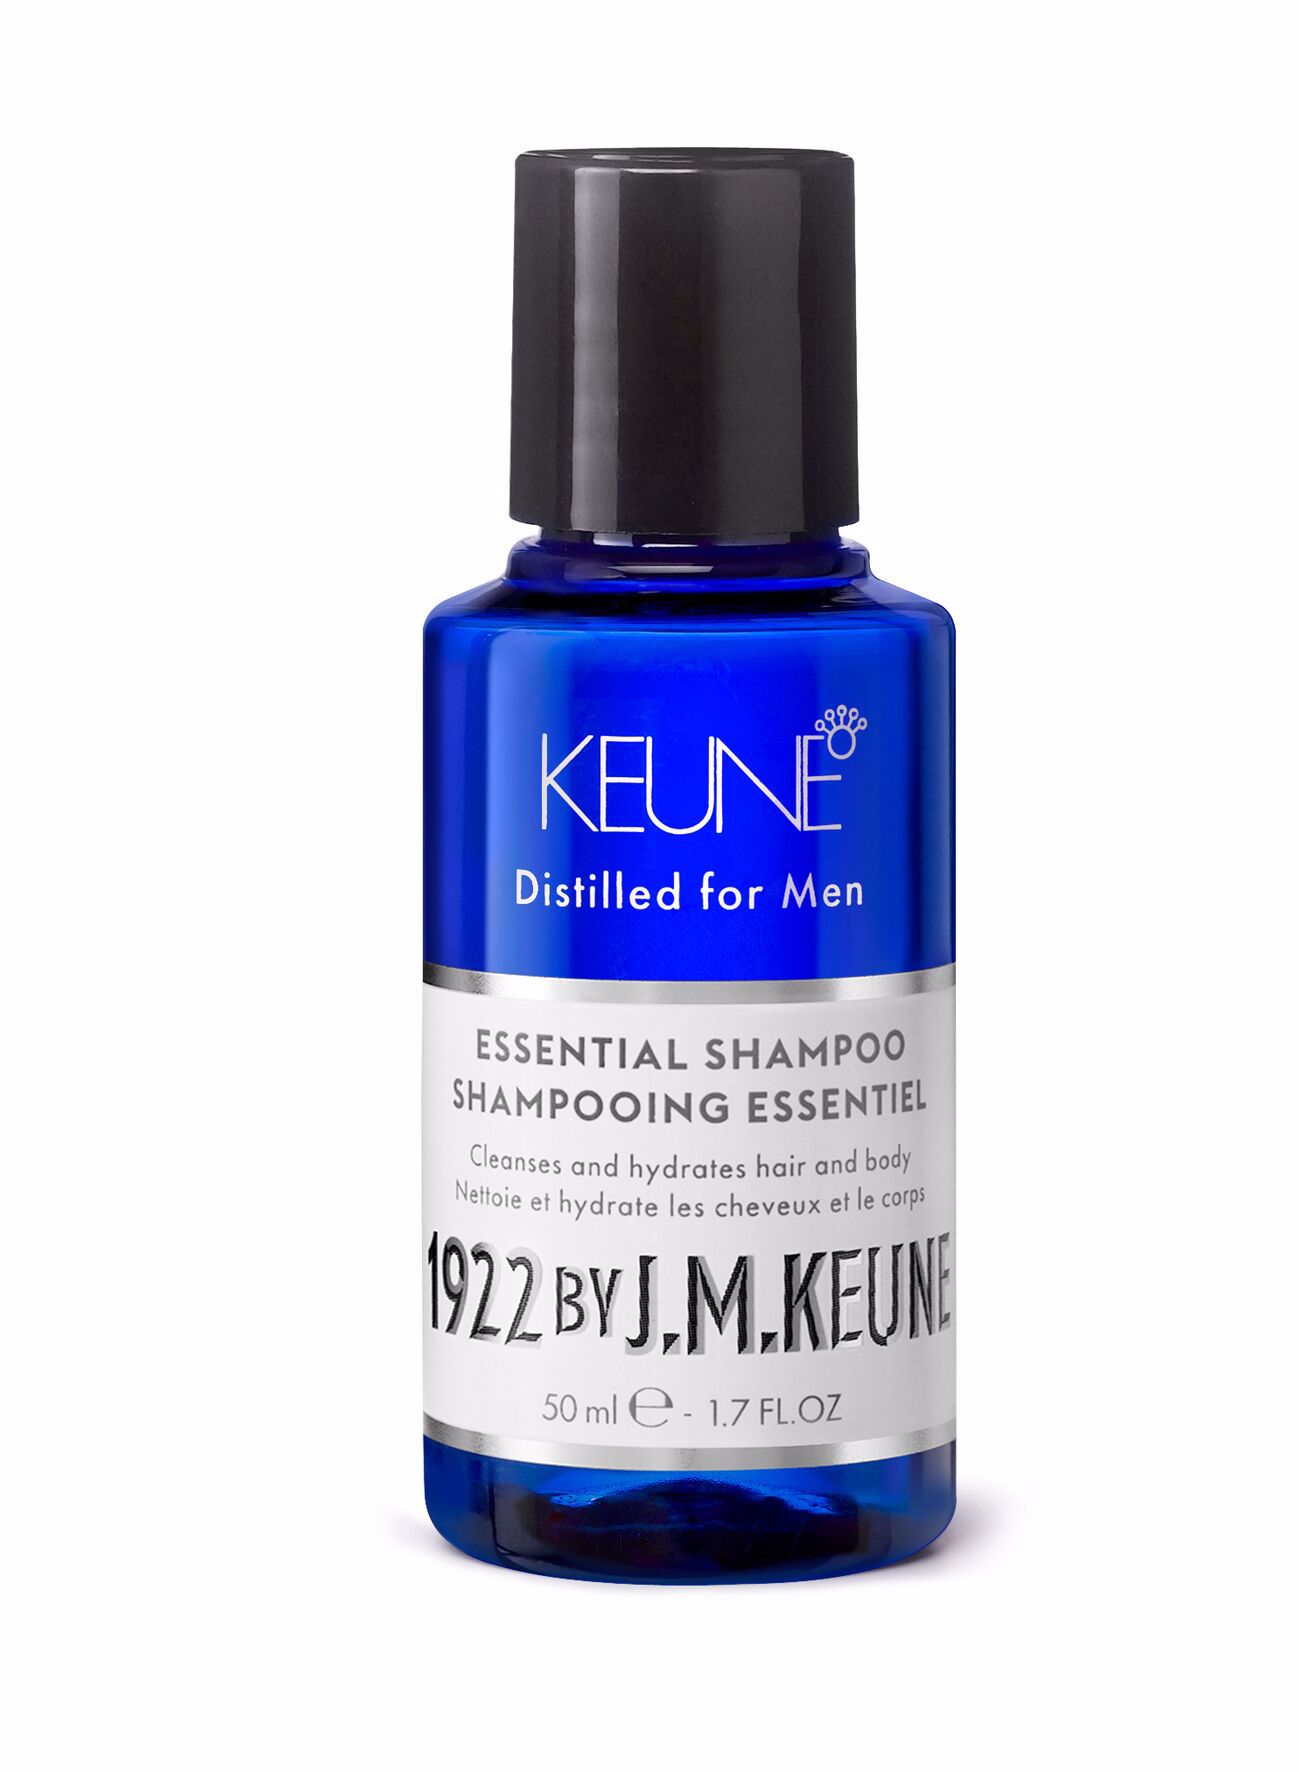 The Essential Shampoo for men cleans hair, beard, and body thoroughly. Creatine and bamboo extract strengthen and add volume. Now available on keune.ch.